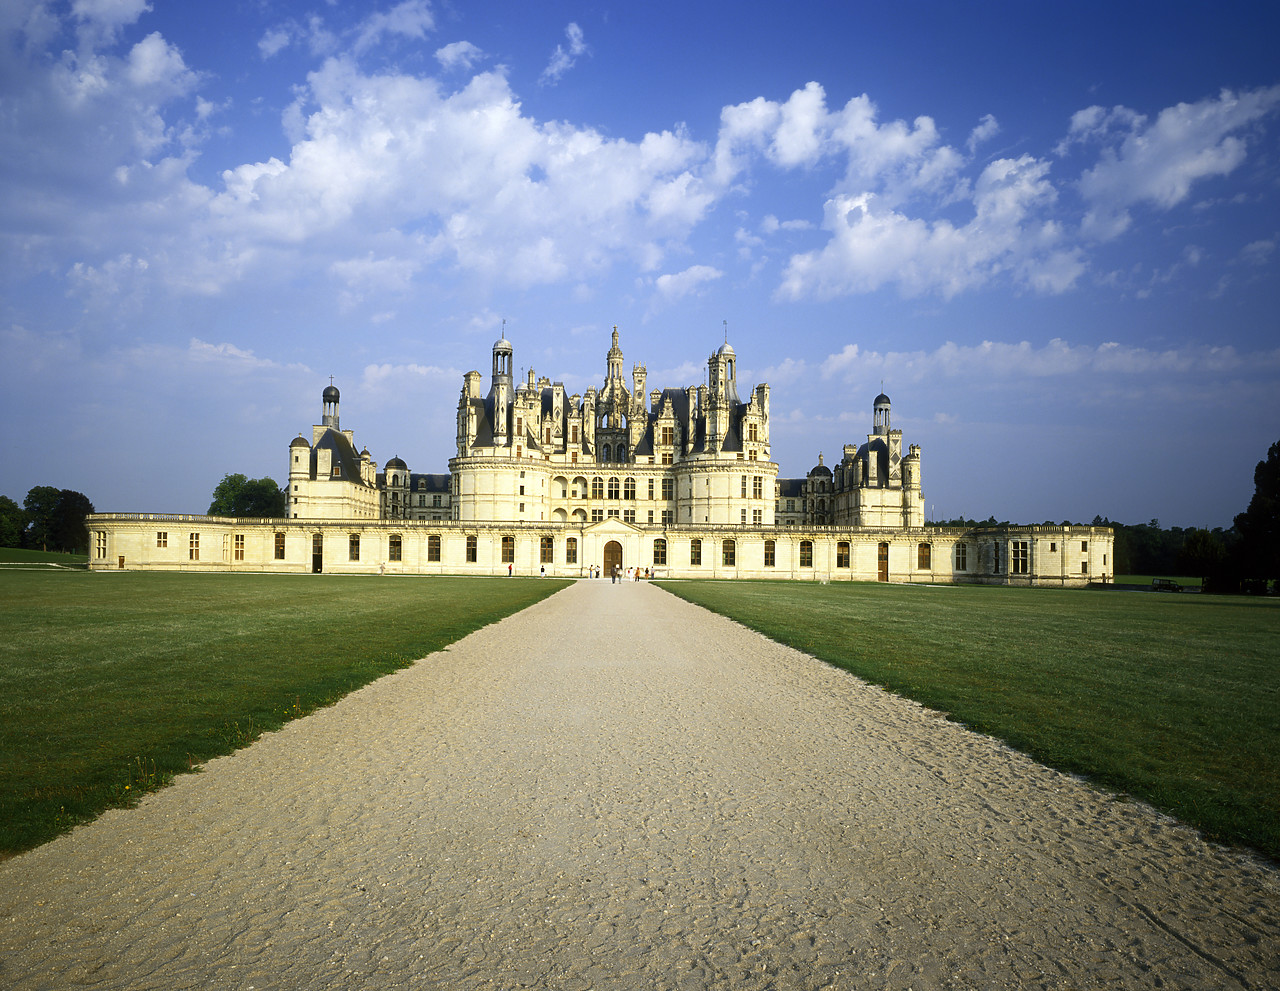 #871070-1 - Chateau Chambord, Loire Valley, France